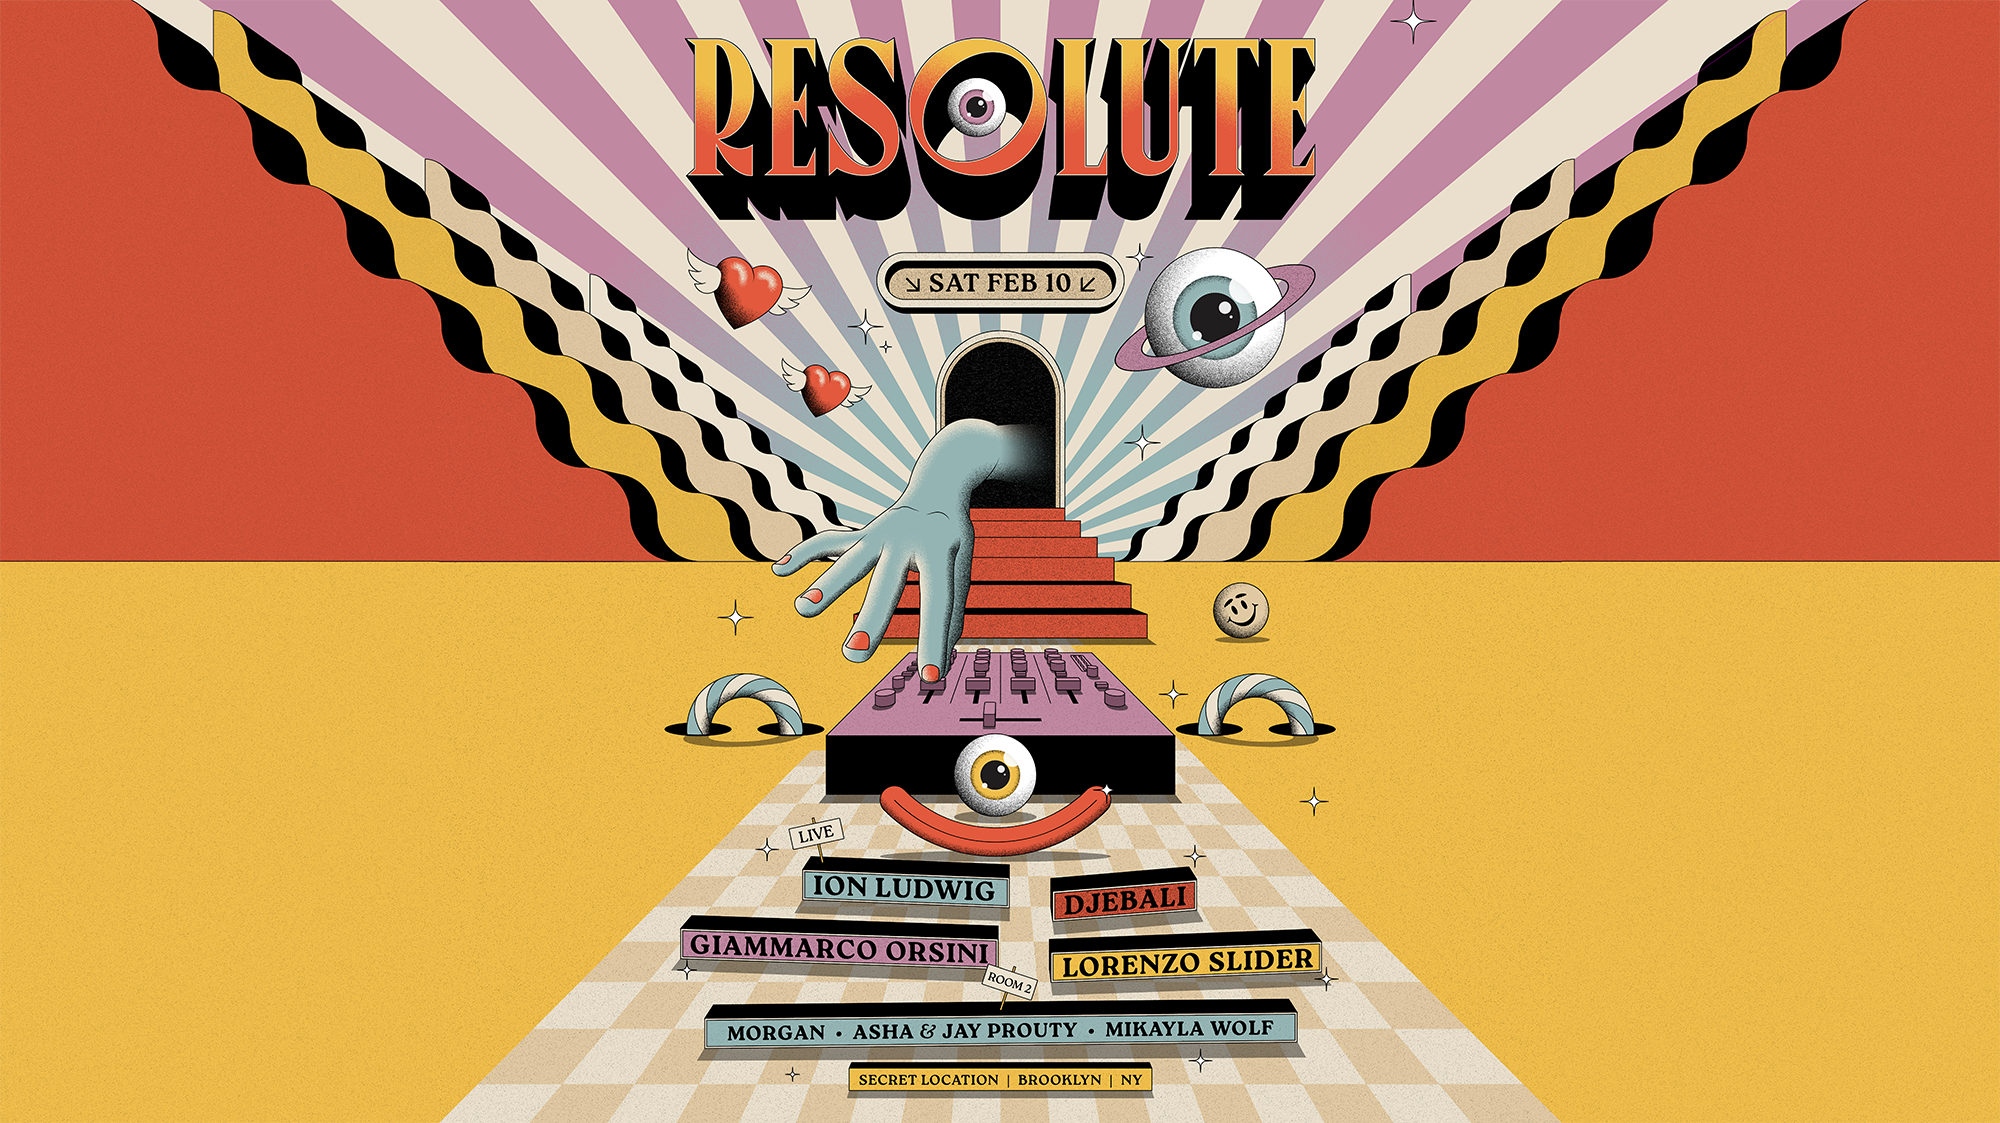 ReSolute · Upcoming Events, Tickets & News